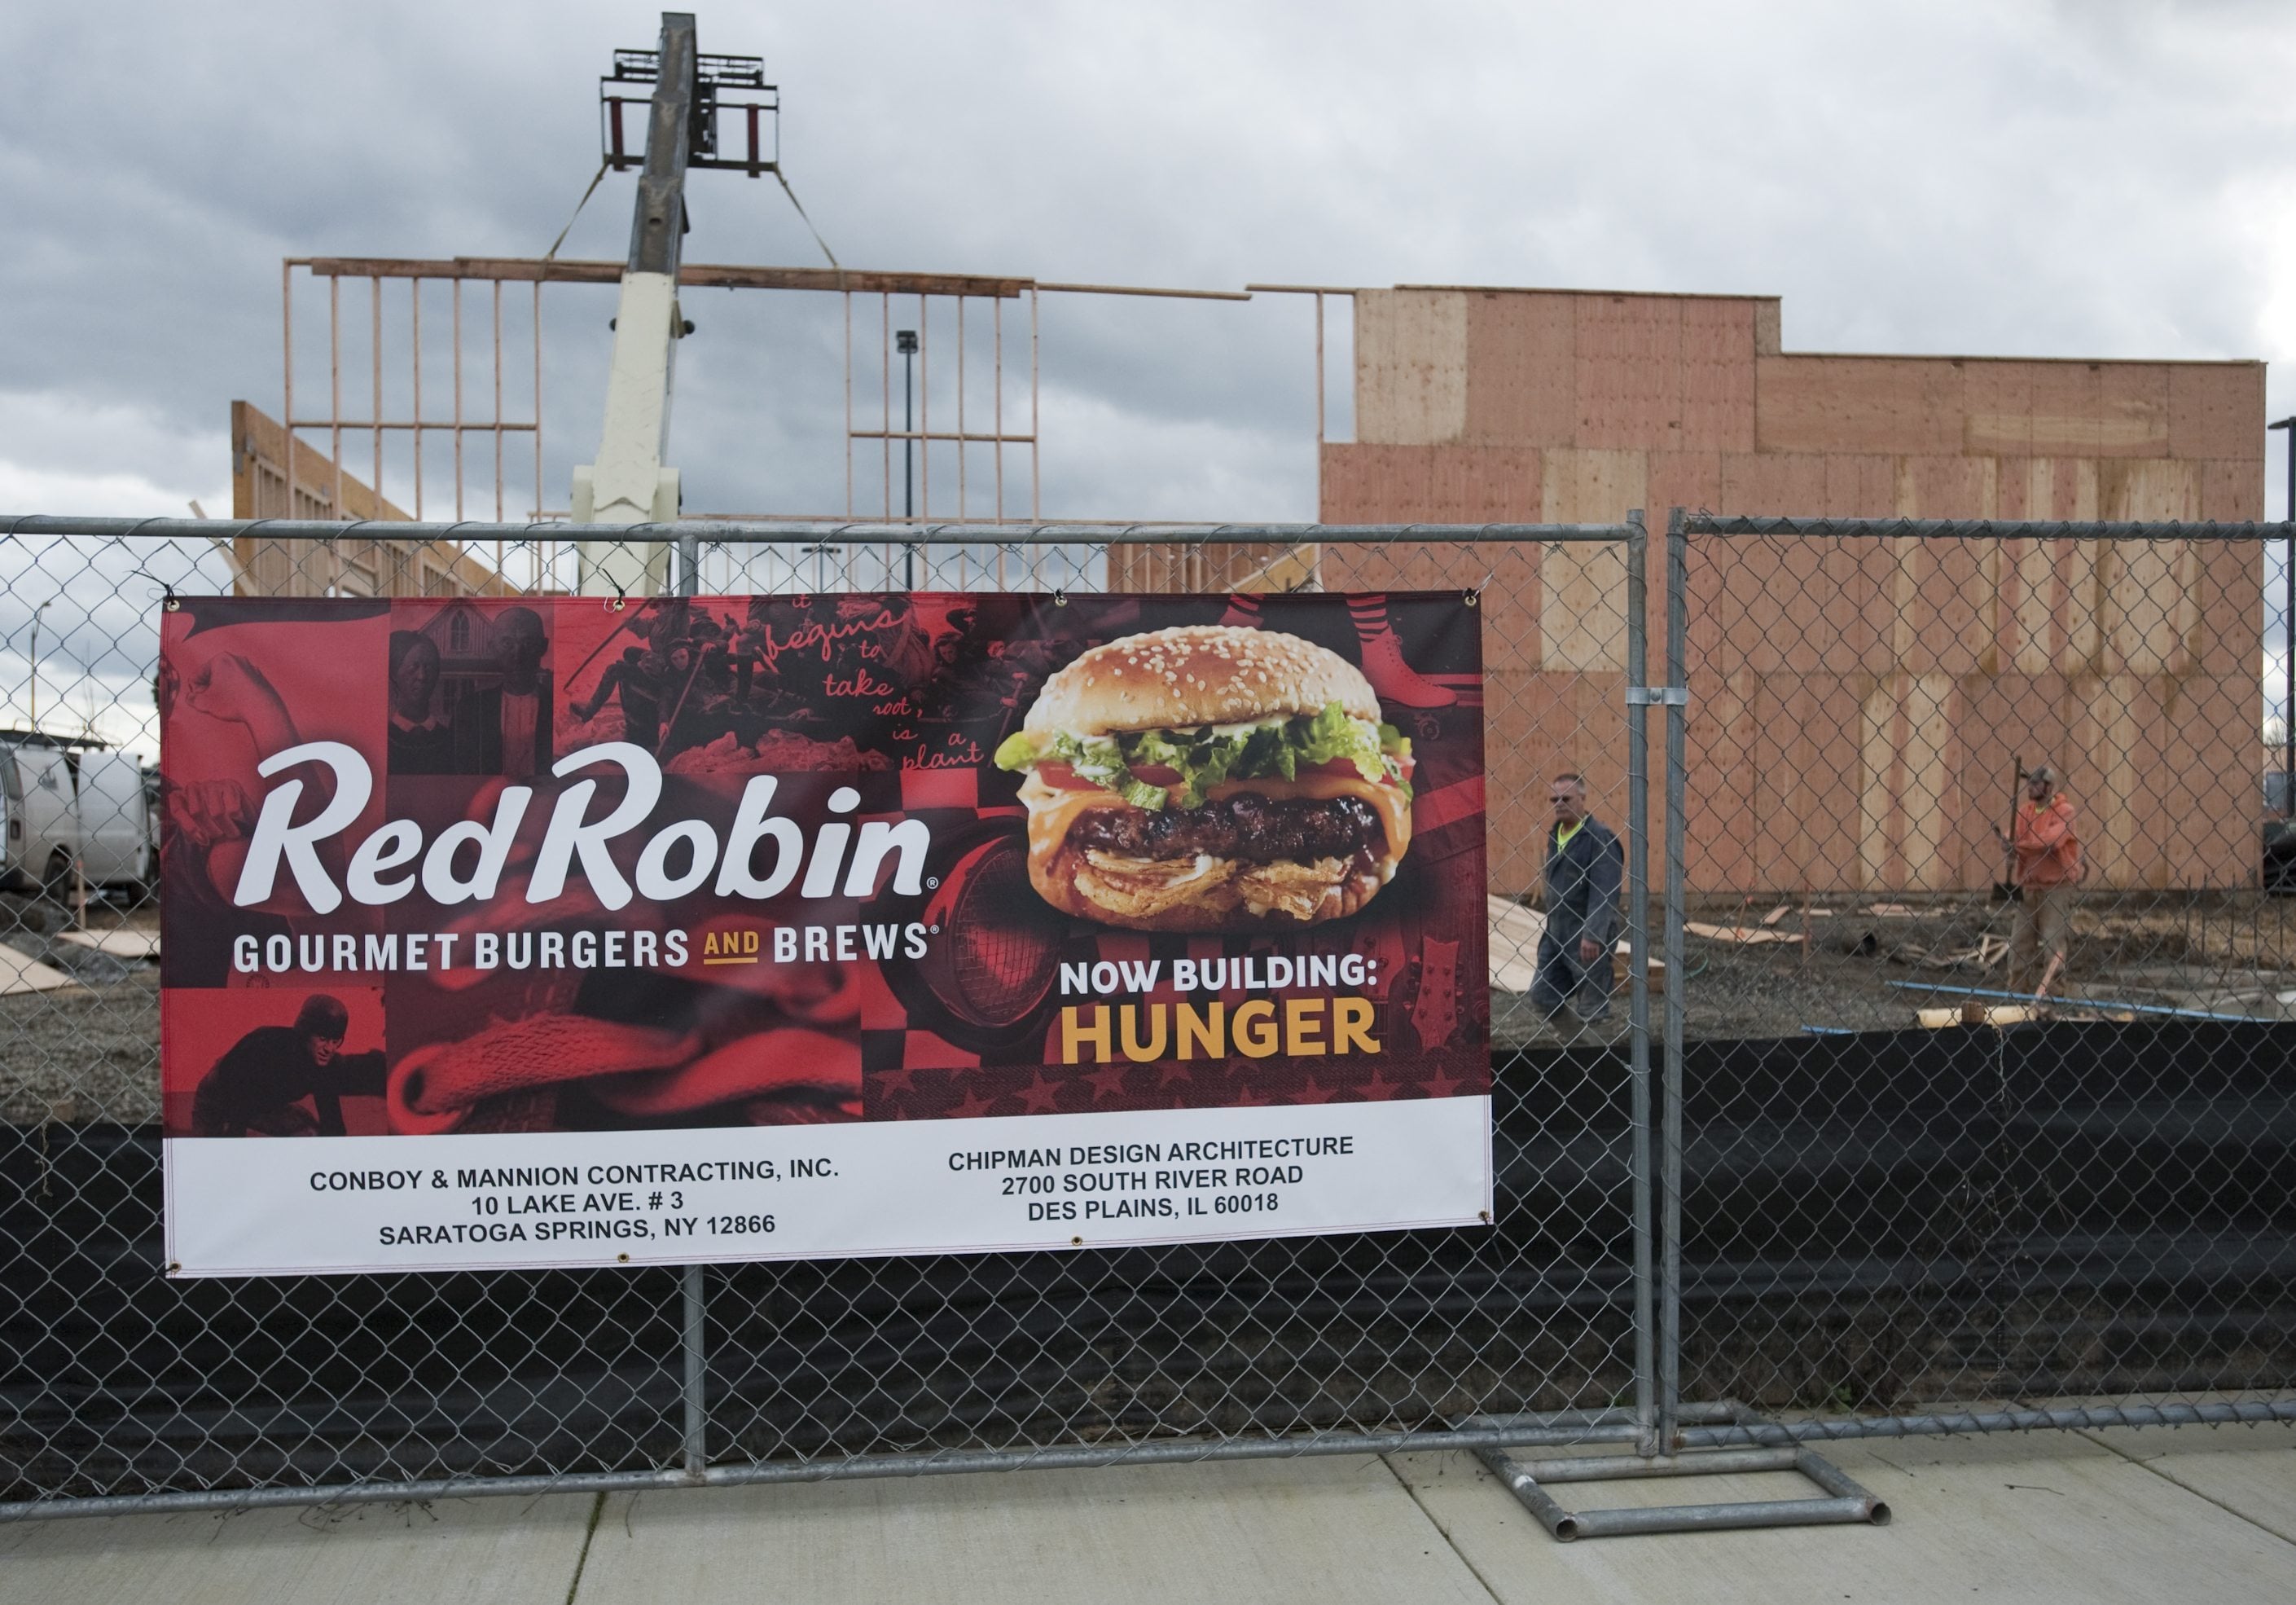 Construction is underway on a new Red Robin restaurant in Battle Ground&#039;s Millcreek Town Center, a commercial complex that includes a Wal-Mart store.